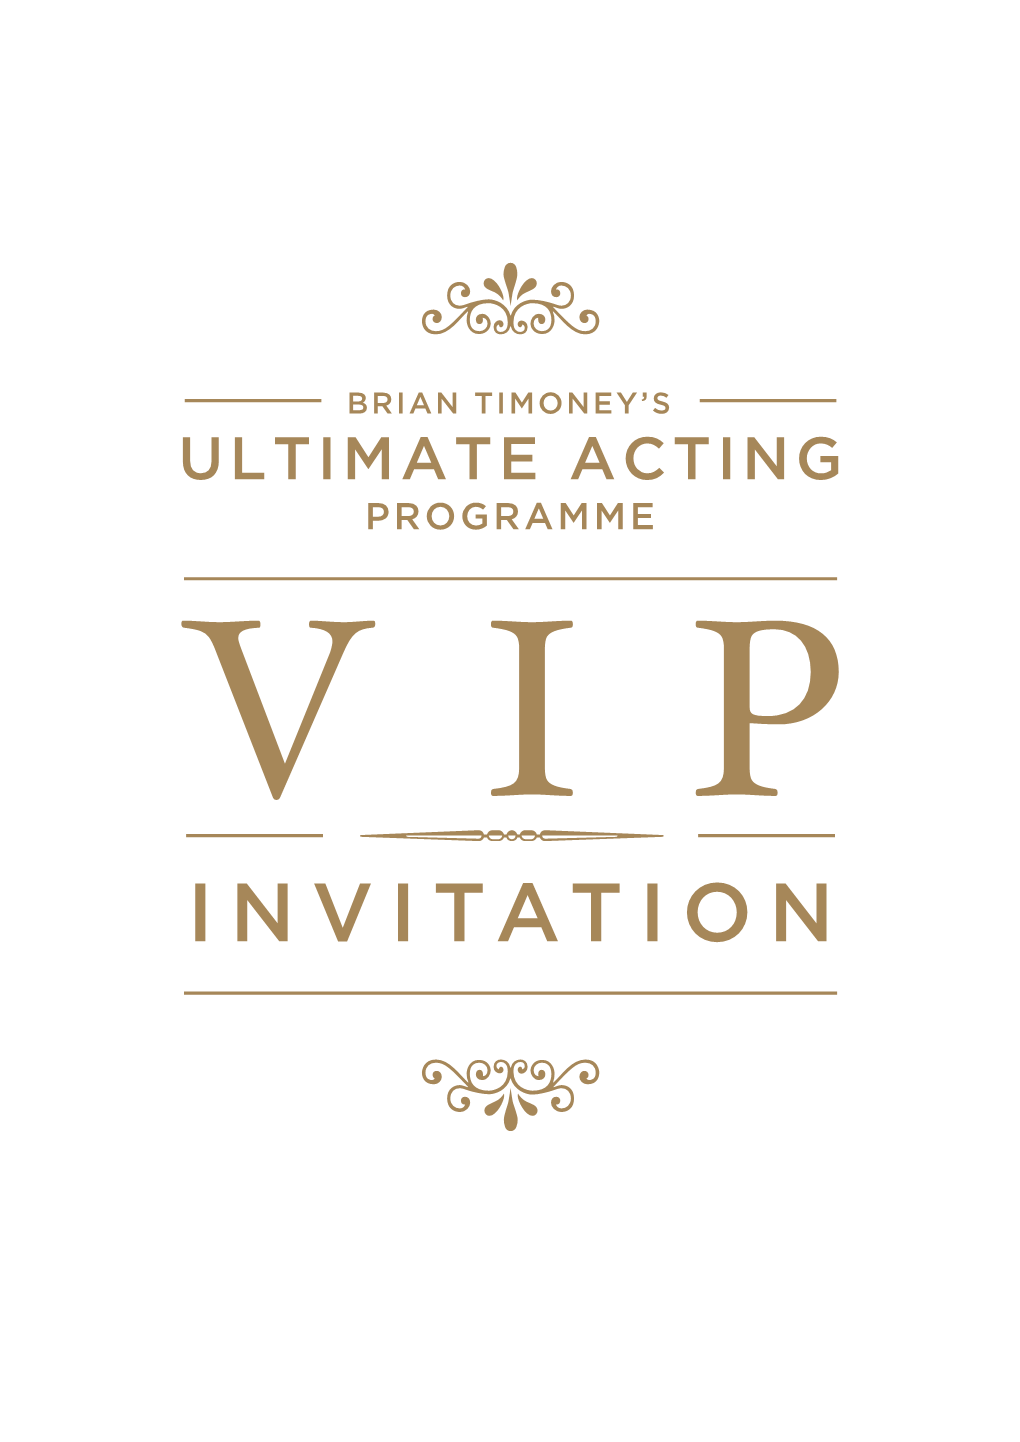 INVITATION “I Can Make You a Professional Actor in Just One Year”